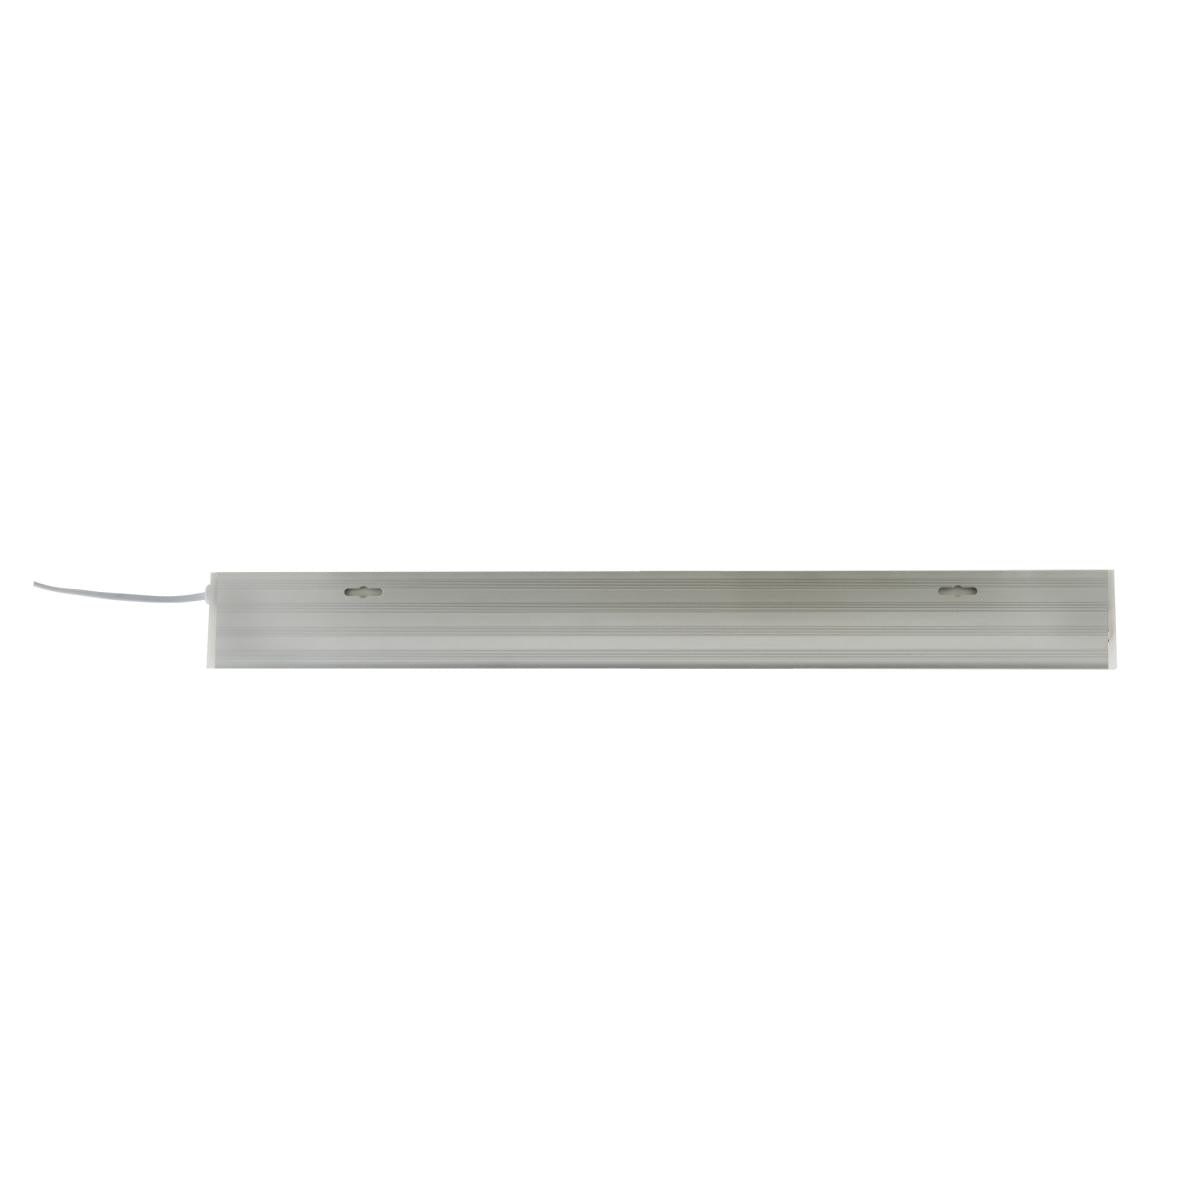 Nuvo 63-701 24 Inch LED Under Cabinet Light Bar With Plug 13.5W 3000K